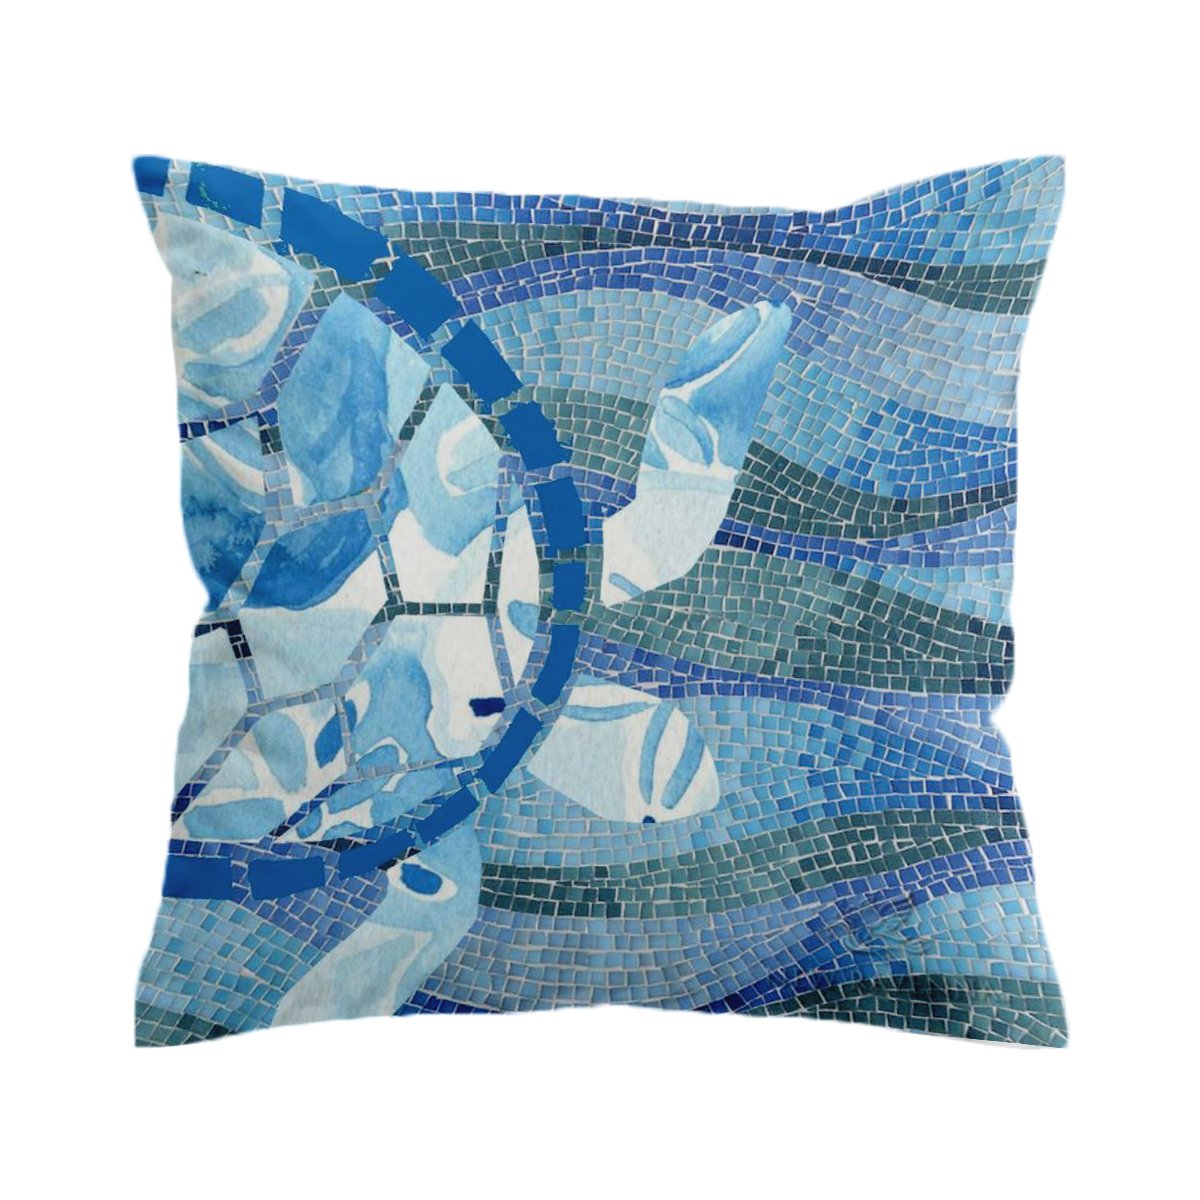 Sea Turtle Mosaic Pillow Cover